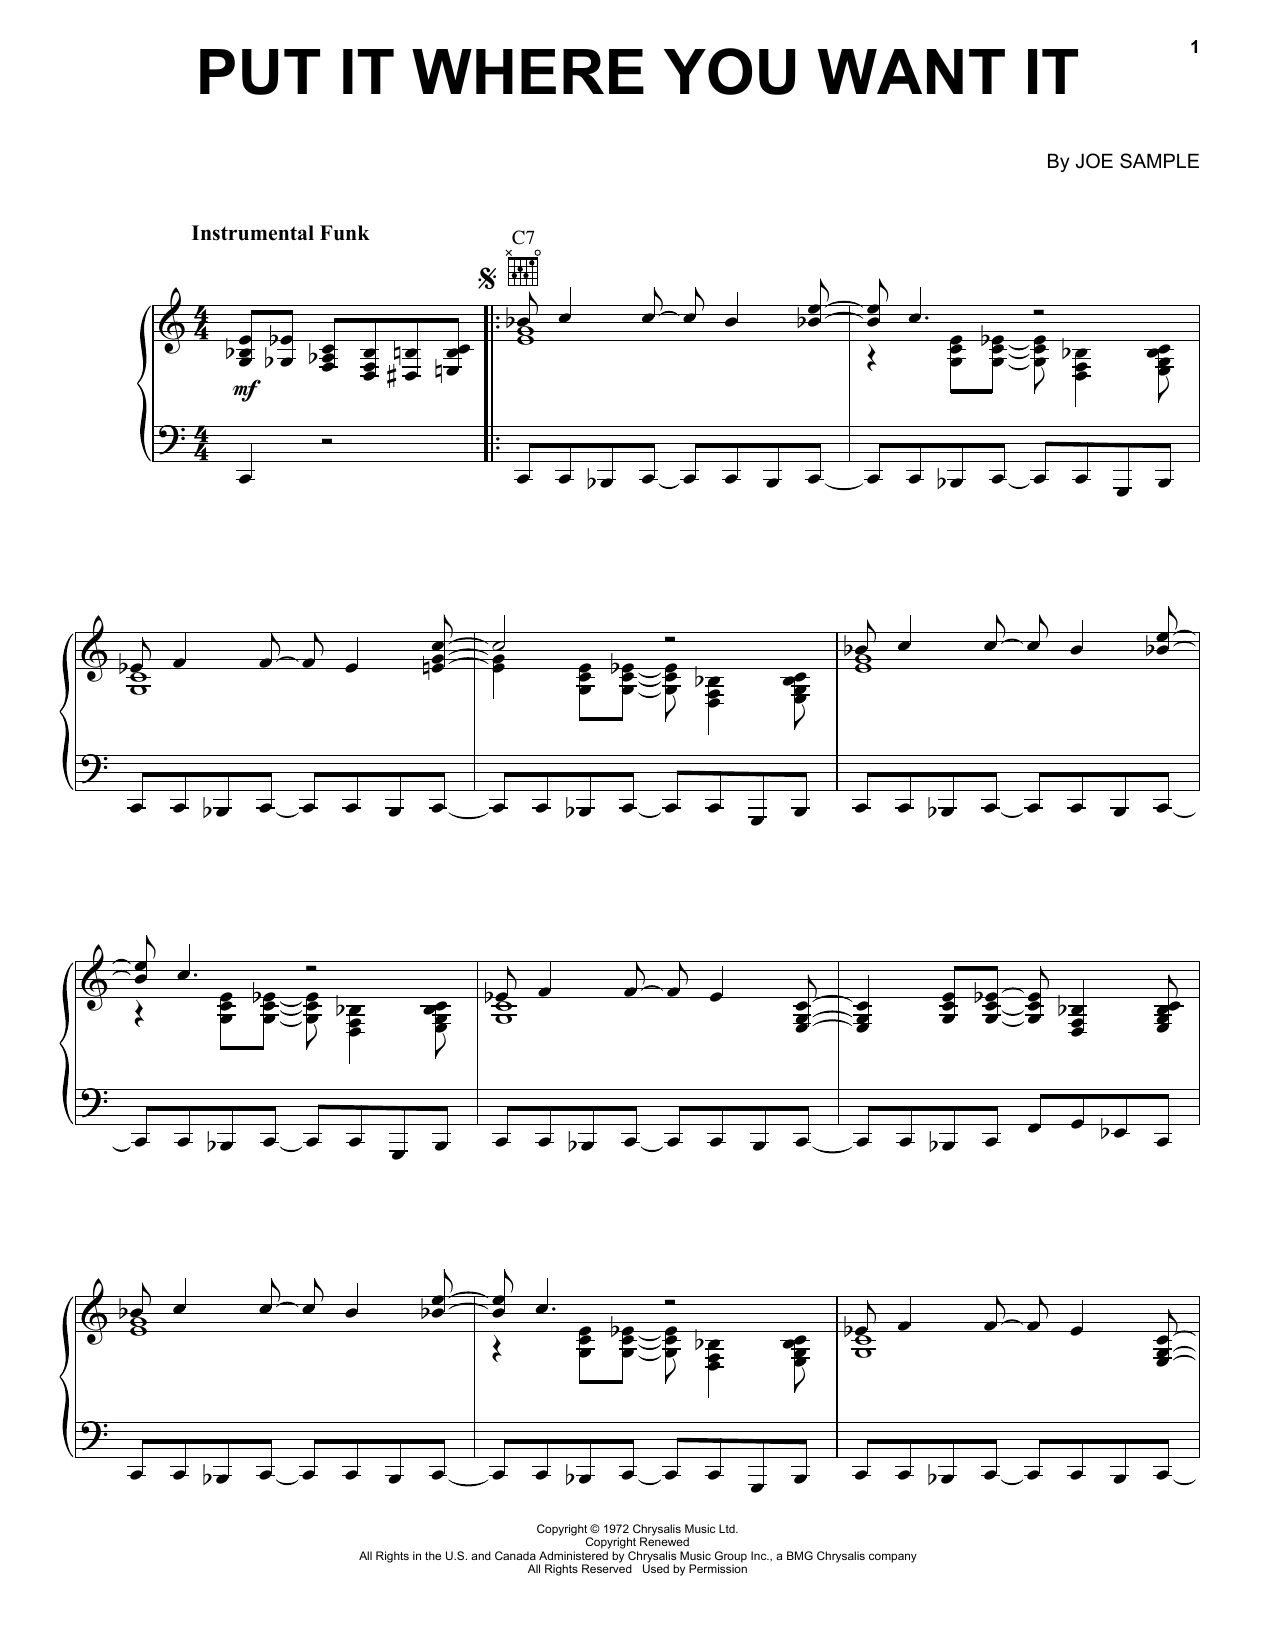 Download The Crusaders Put It Where You Want It Sheet Music